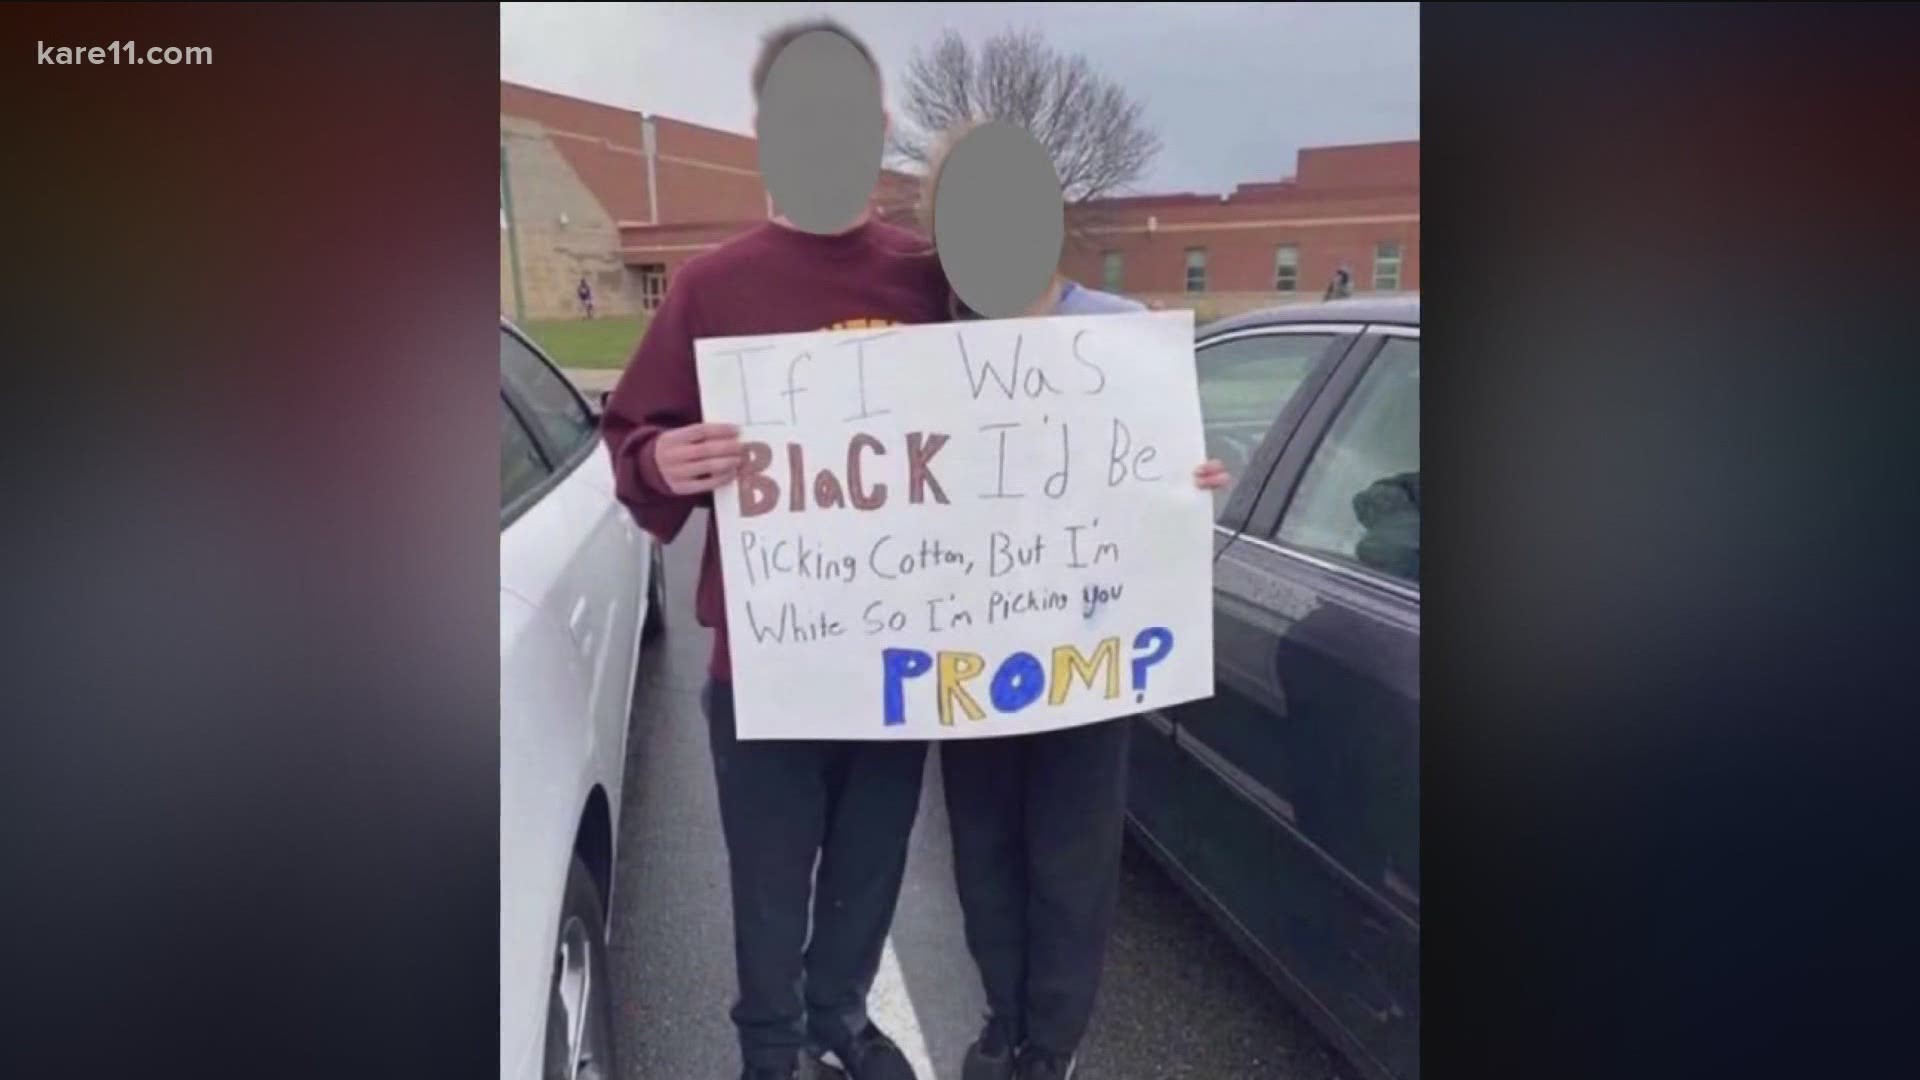 A viral "promposal" photo is putting the city of Big Lake and its high school on the map for all the wrong reasons.